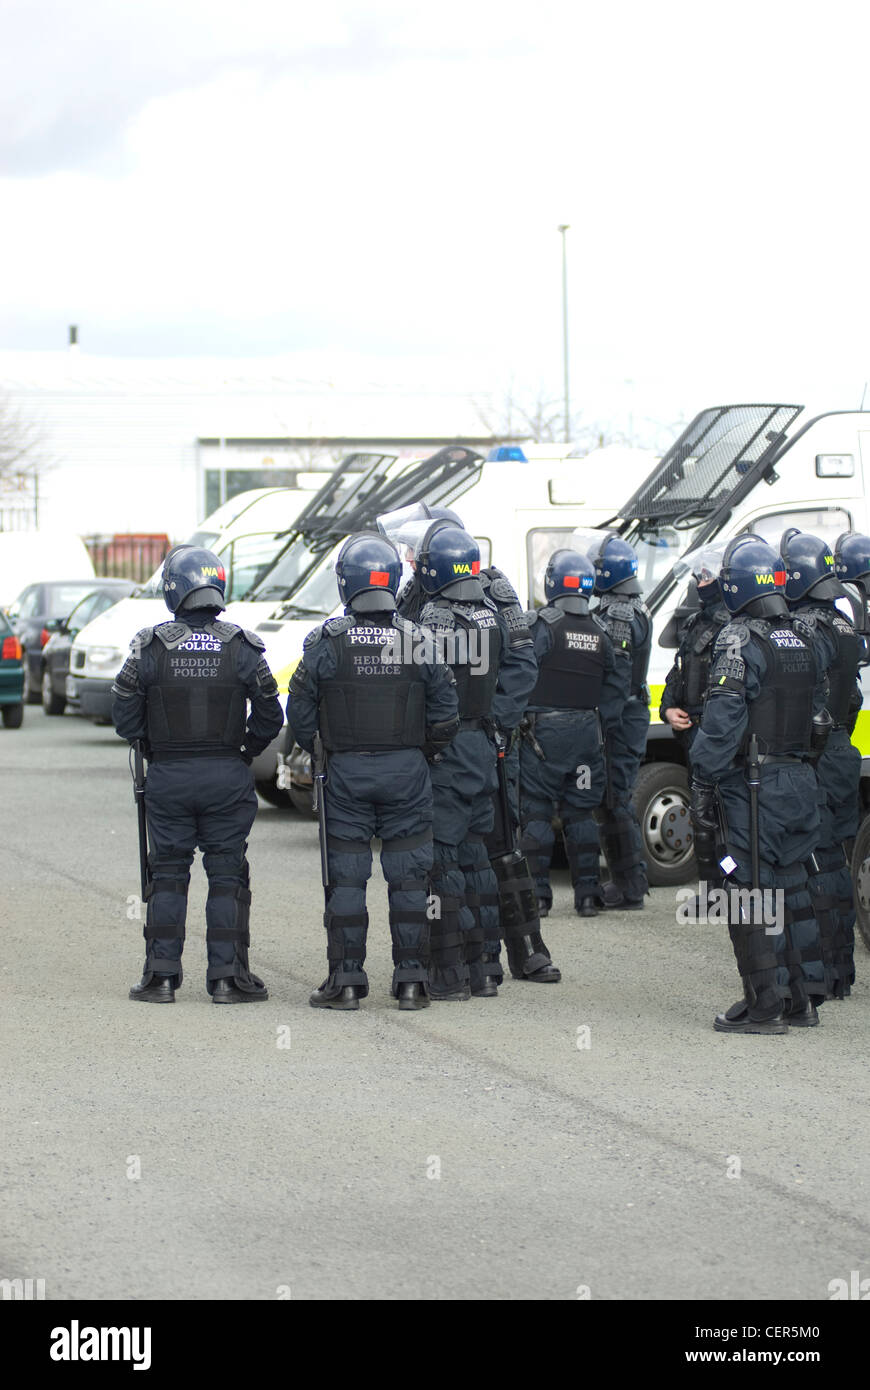 Uk riot police at the scene of a civil disturbance dressed in riot gear  Stock Photo - Alamy